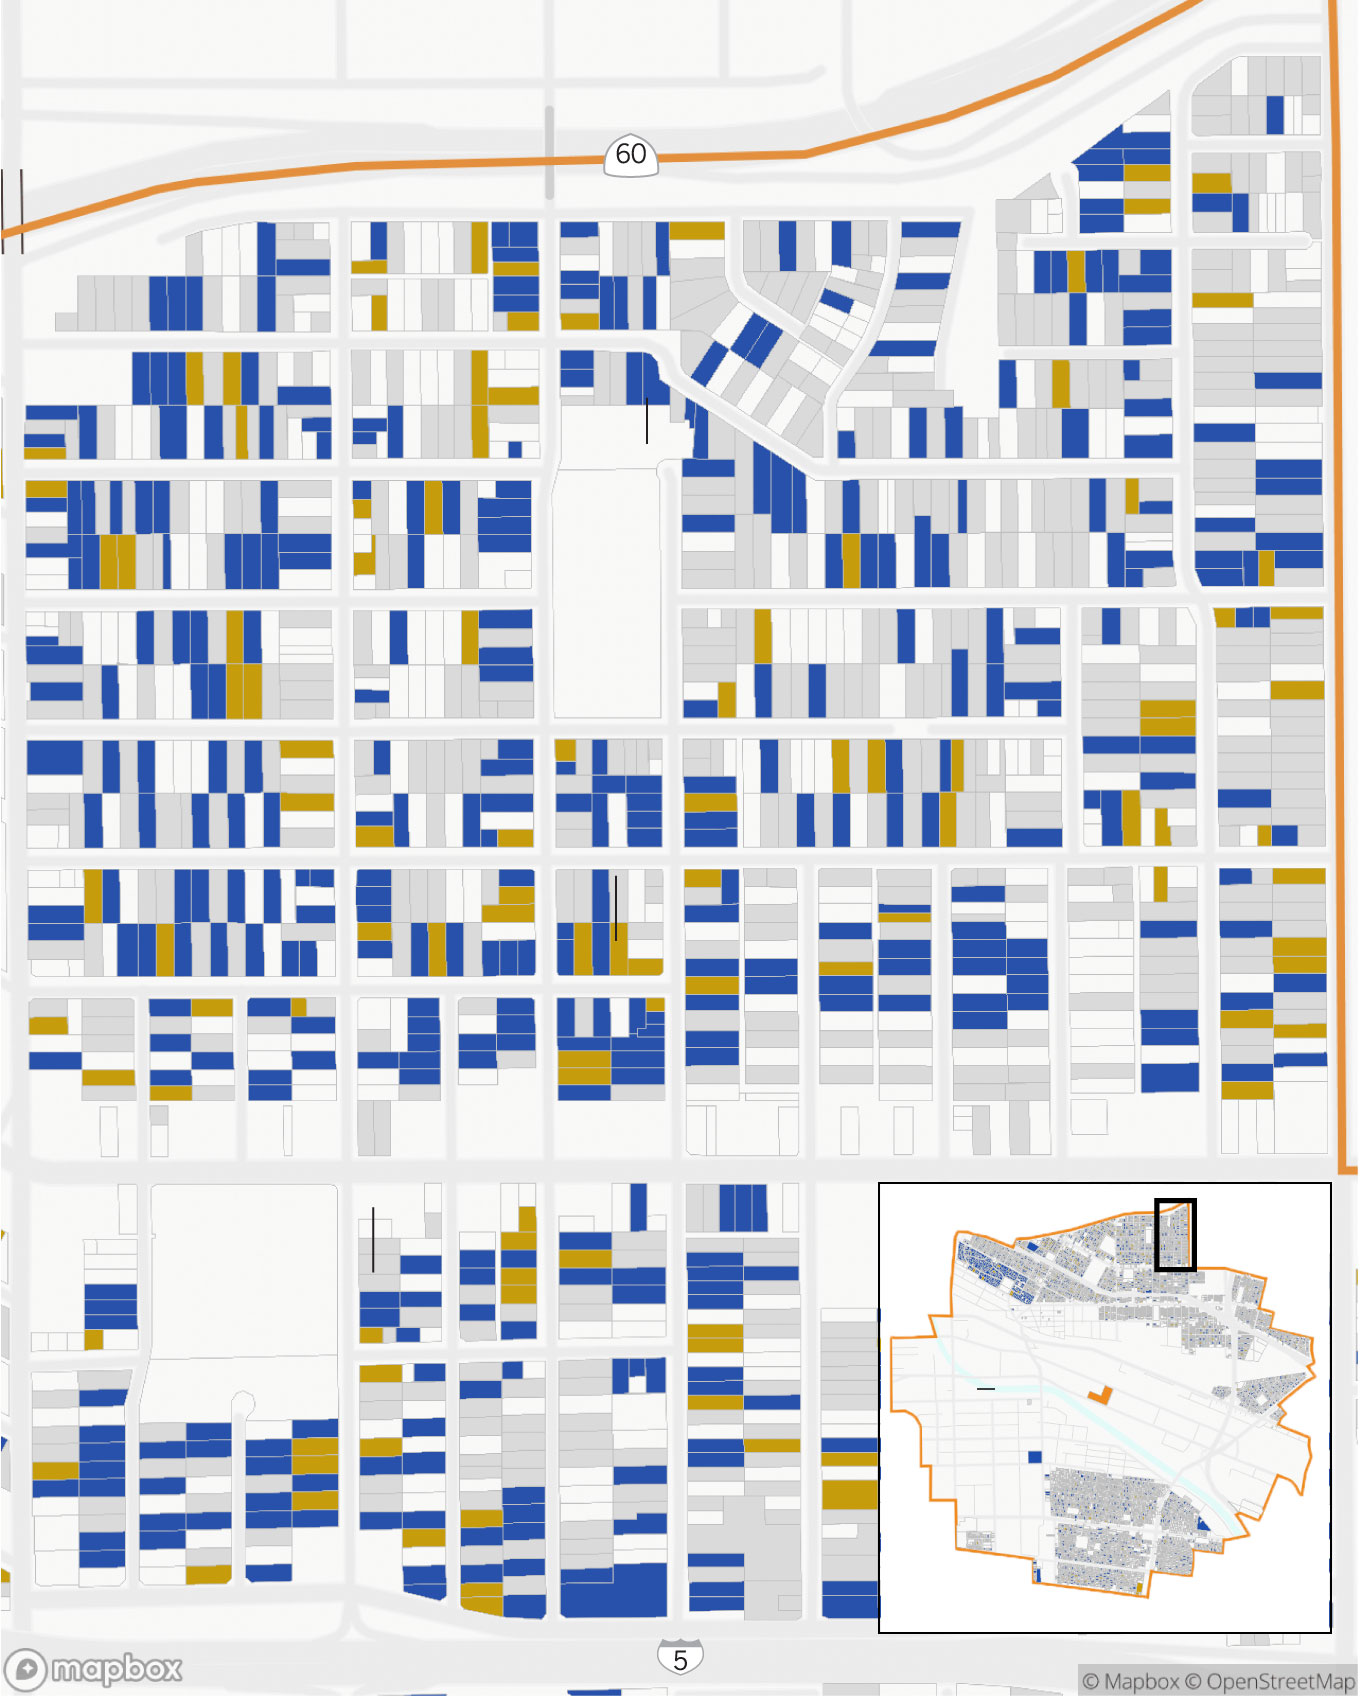 A map of several blocks of properties in East L.A., each colored by their DTSC cleanup status. There are a mix of homes that have been cleaned to standard, homes that have not been cleaned to standard, and homes that have not been cleaned at all or are missing data.